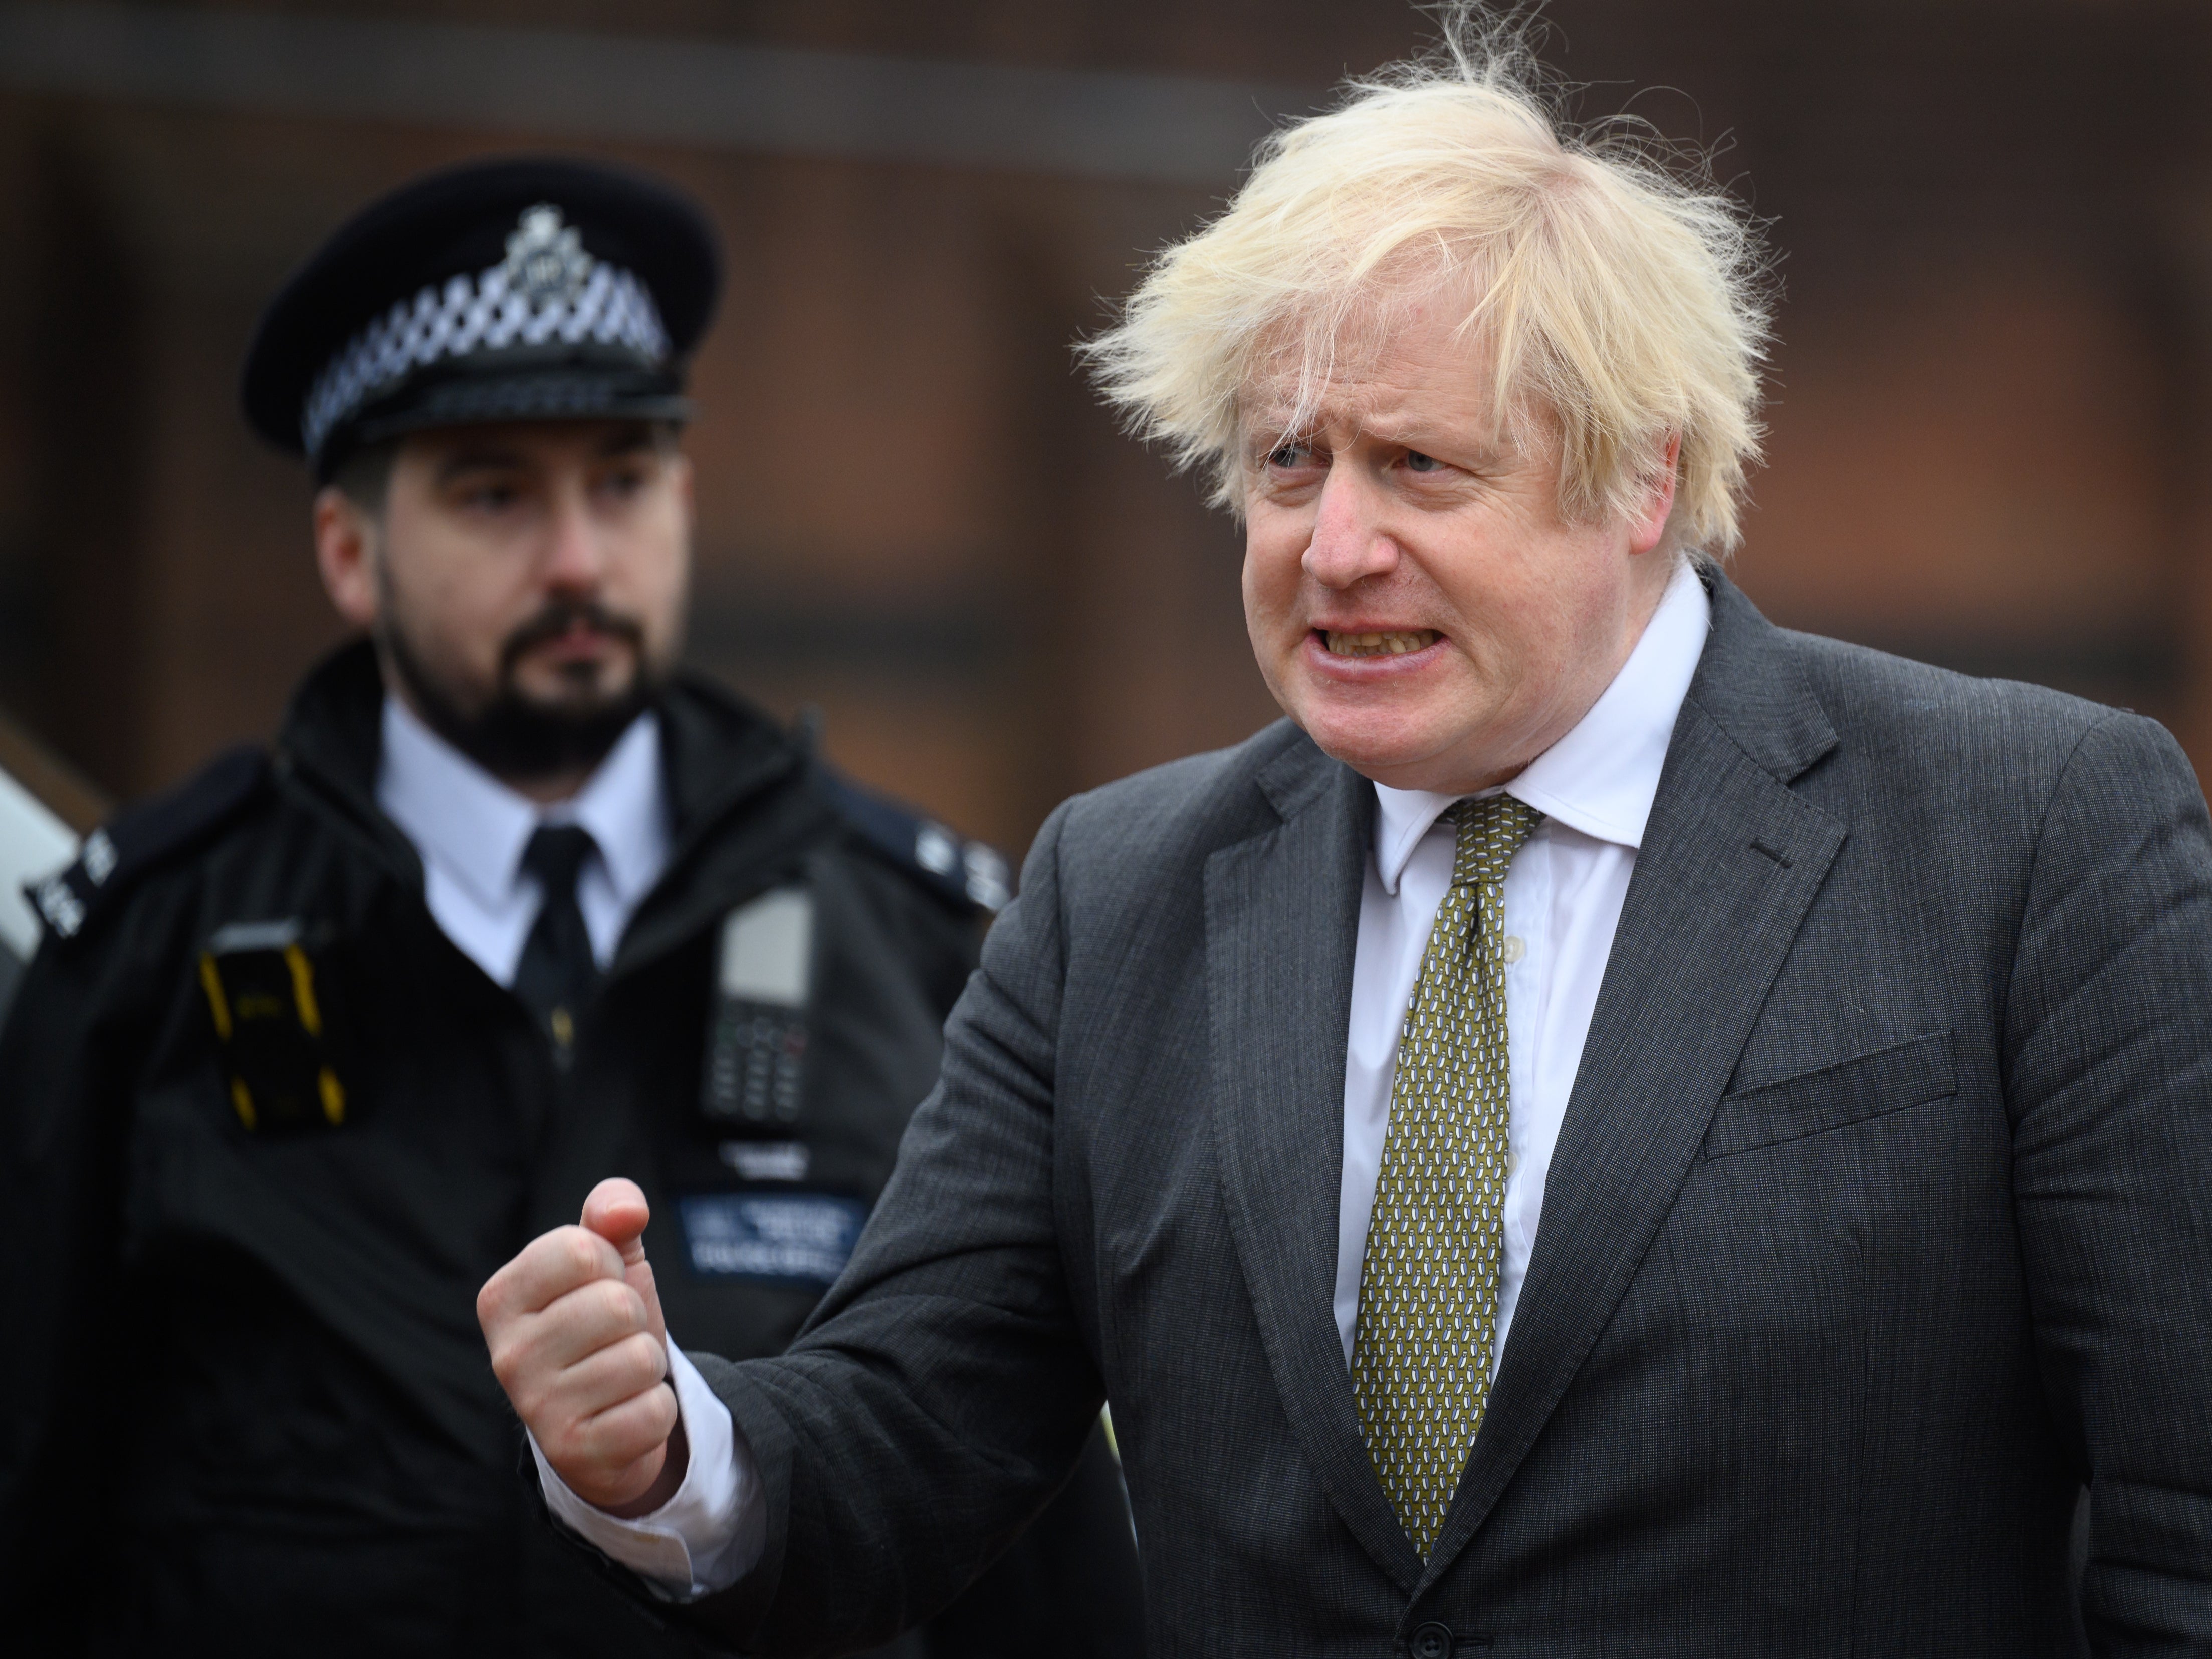 Boris Johnson speaks with officers on a constituency visit to Uxbridge police station last week